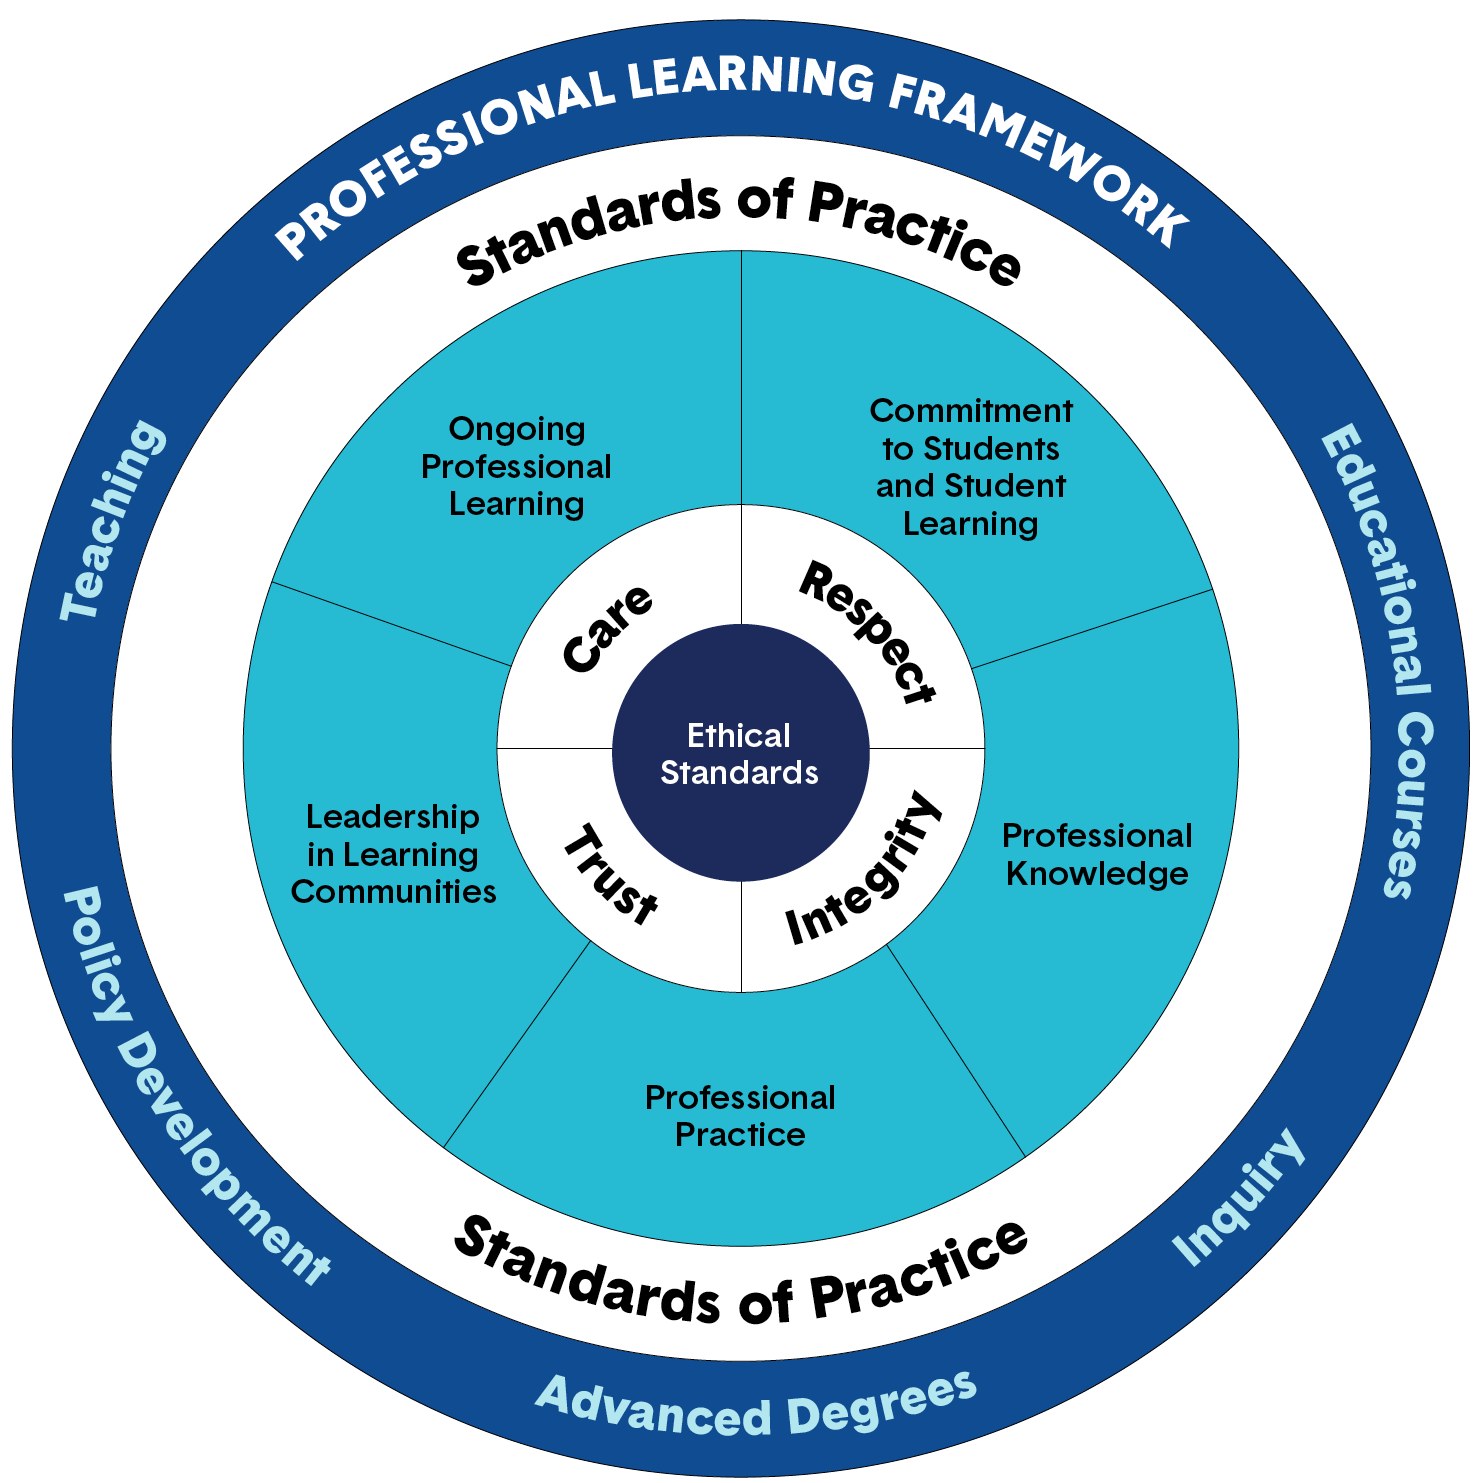 A graphic with concentric circles illustrates the professional learning framework. Long description follows.